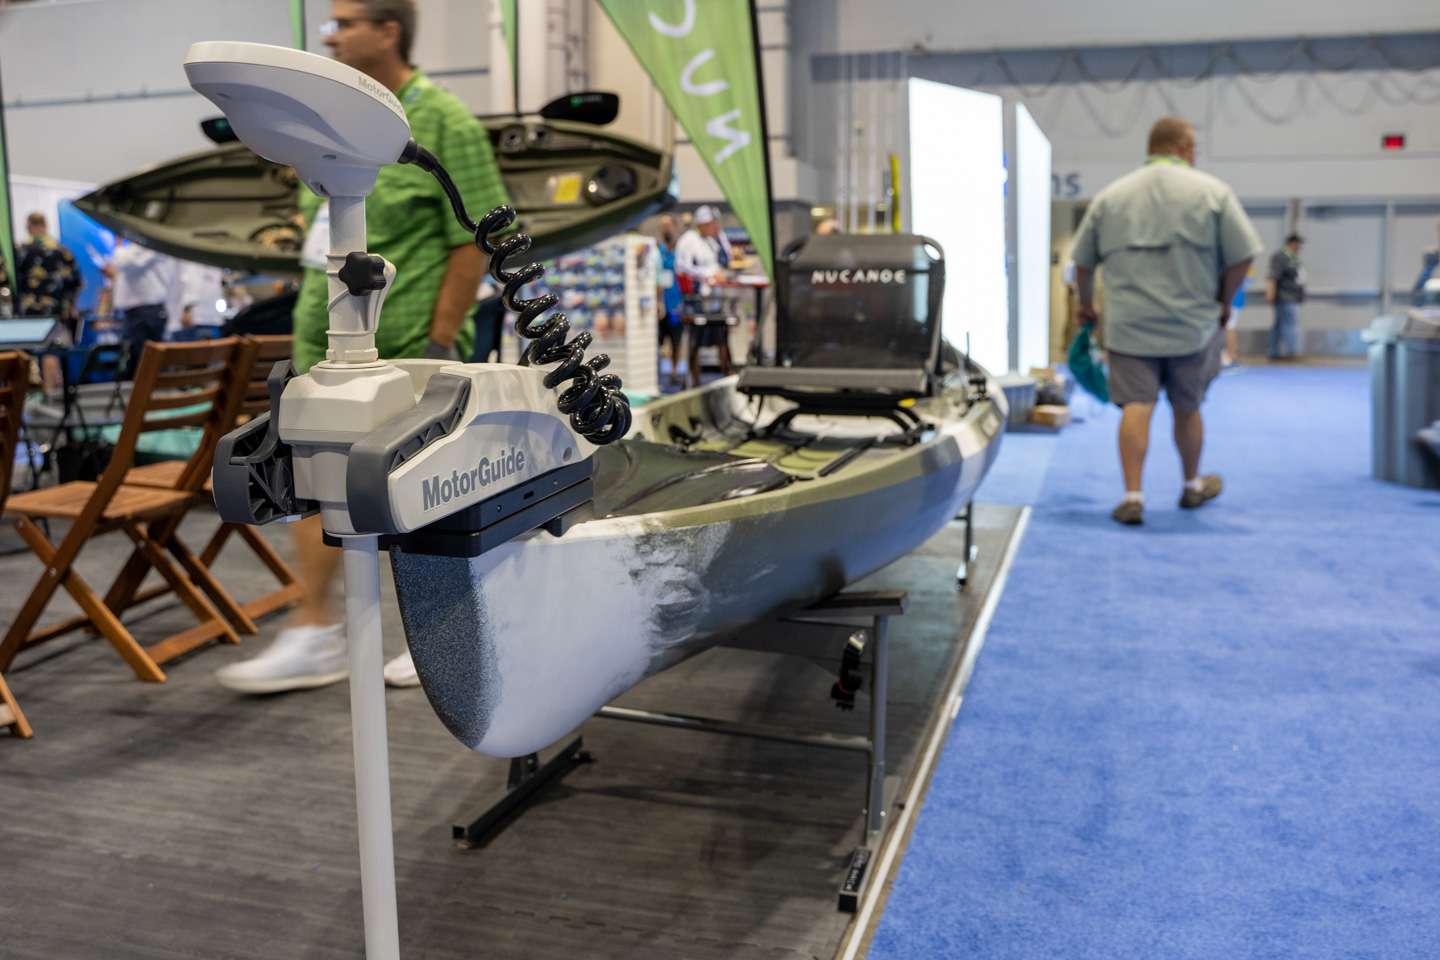 A look at the NuCanoe Pursuit kayak paired with MotorGuide Xi3 trolling motor. 